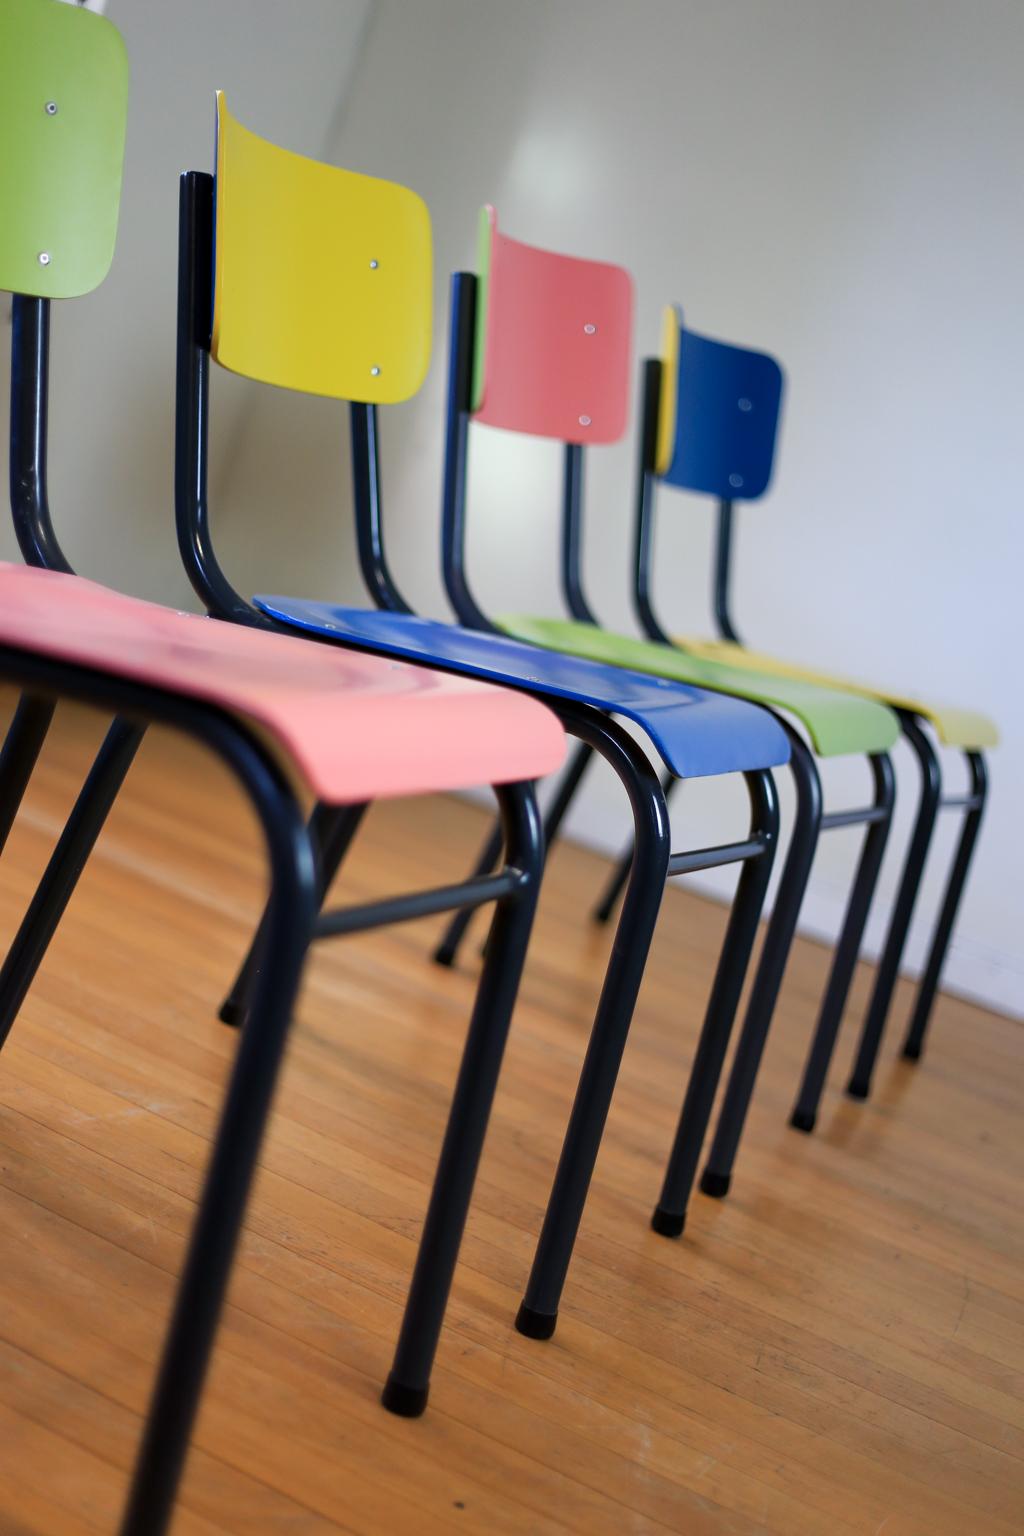 Bauhaus Tubular Steel Stacking Chairs, Refurbished In Good Condition For Sale In Cape Town, Western Cape